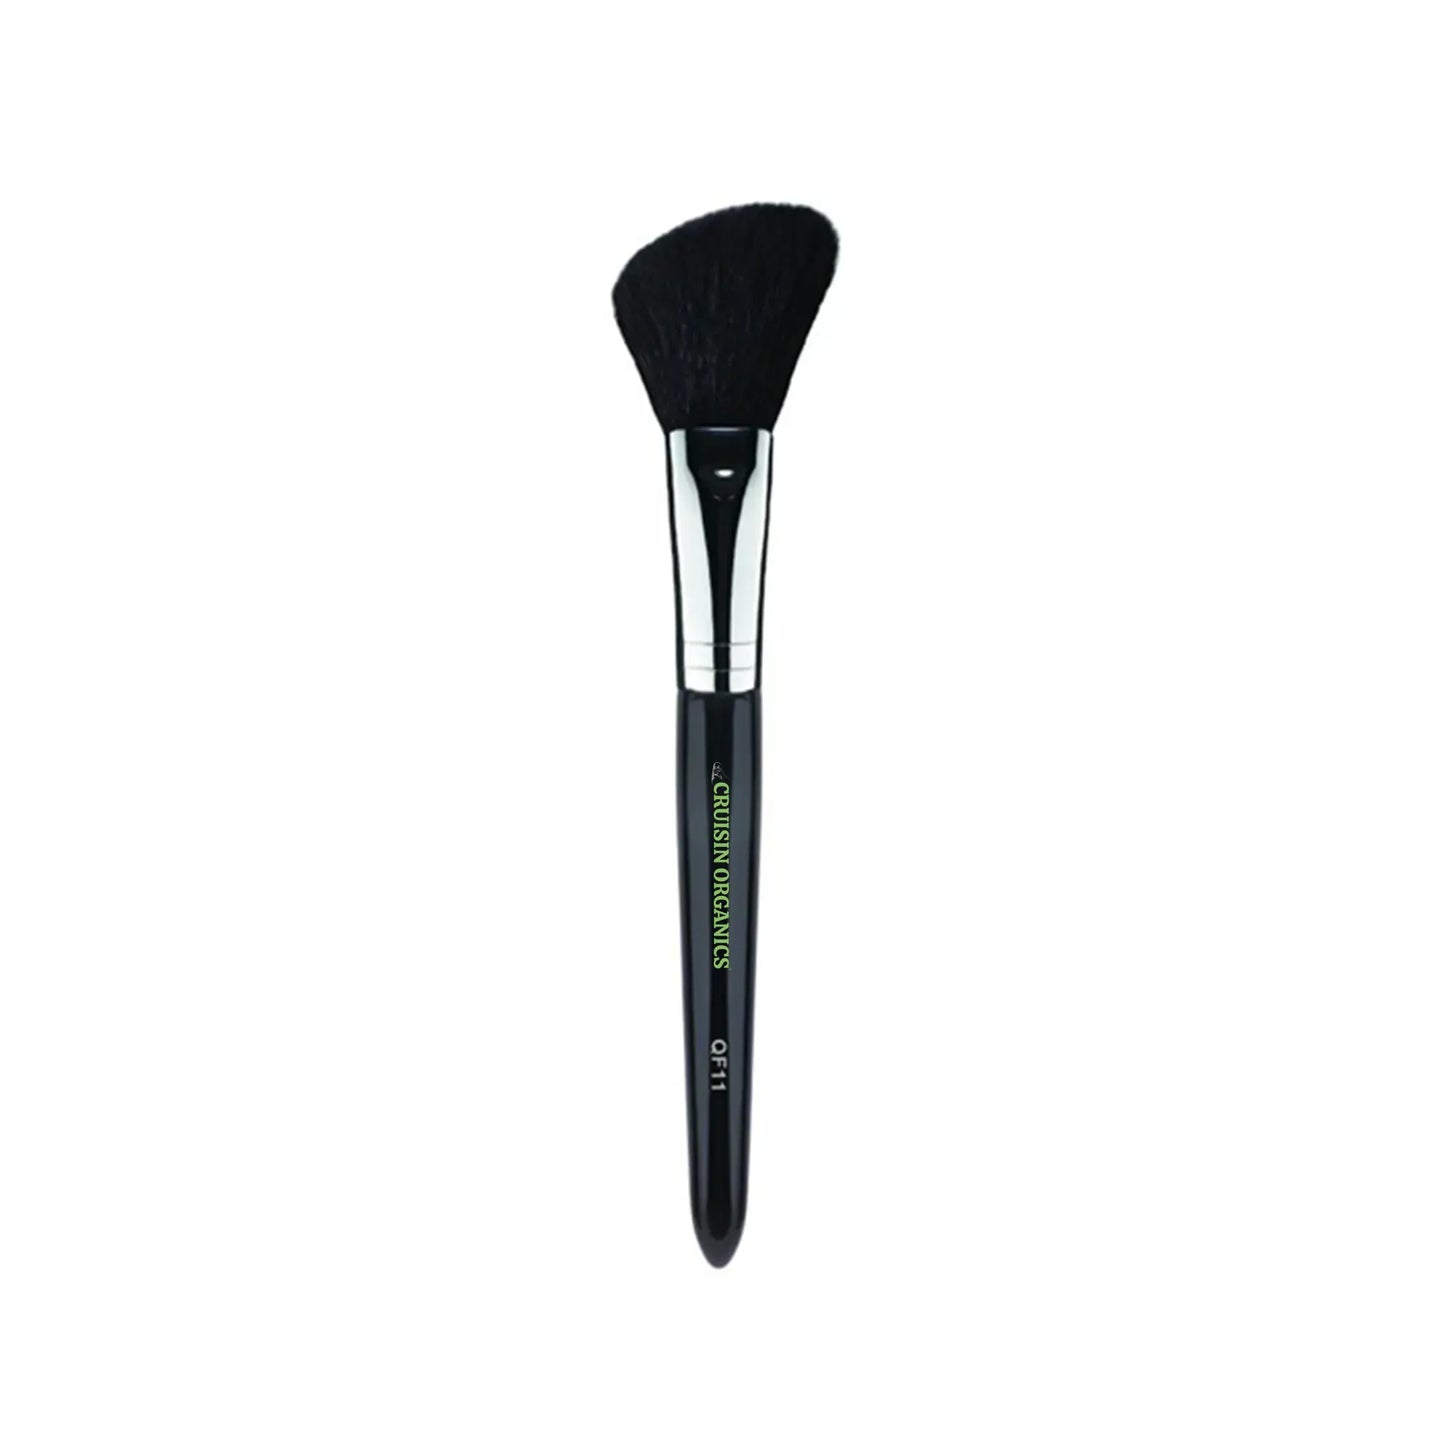 A new and improved product! The multitasker Cruisin Organics angled blush brush for your powdered blush and contour makeup! Apply your face powder or powder blush with a seamless finish using this ultra-soft angled face brush. Its featured angle perfectly glides against the cheek and cheekbone area to easily enhance and add definition to the face.